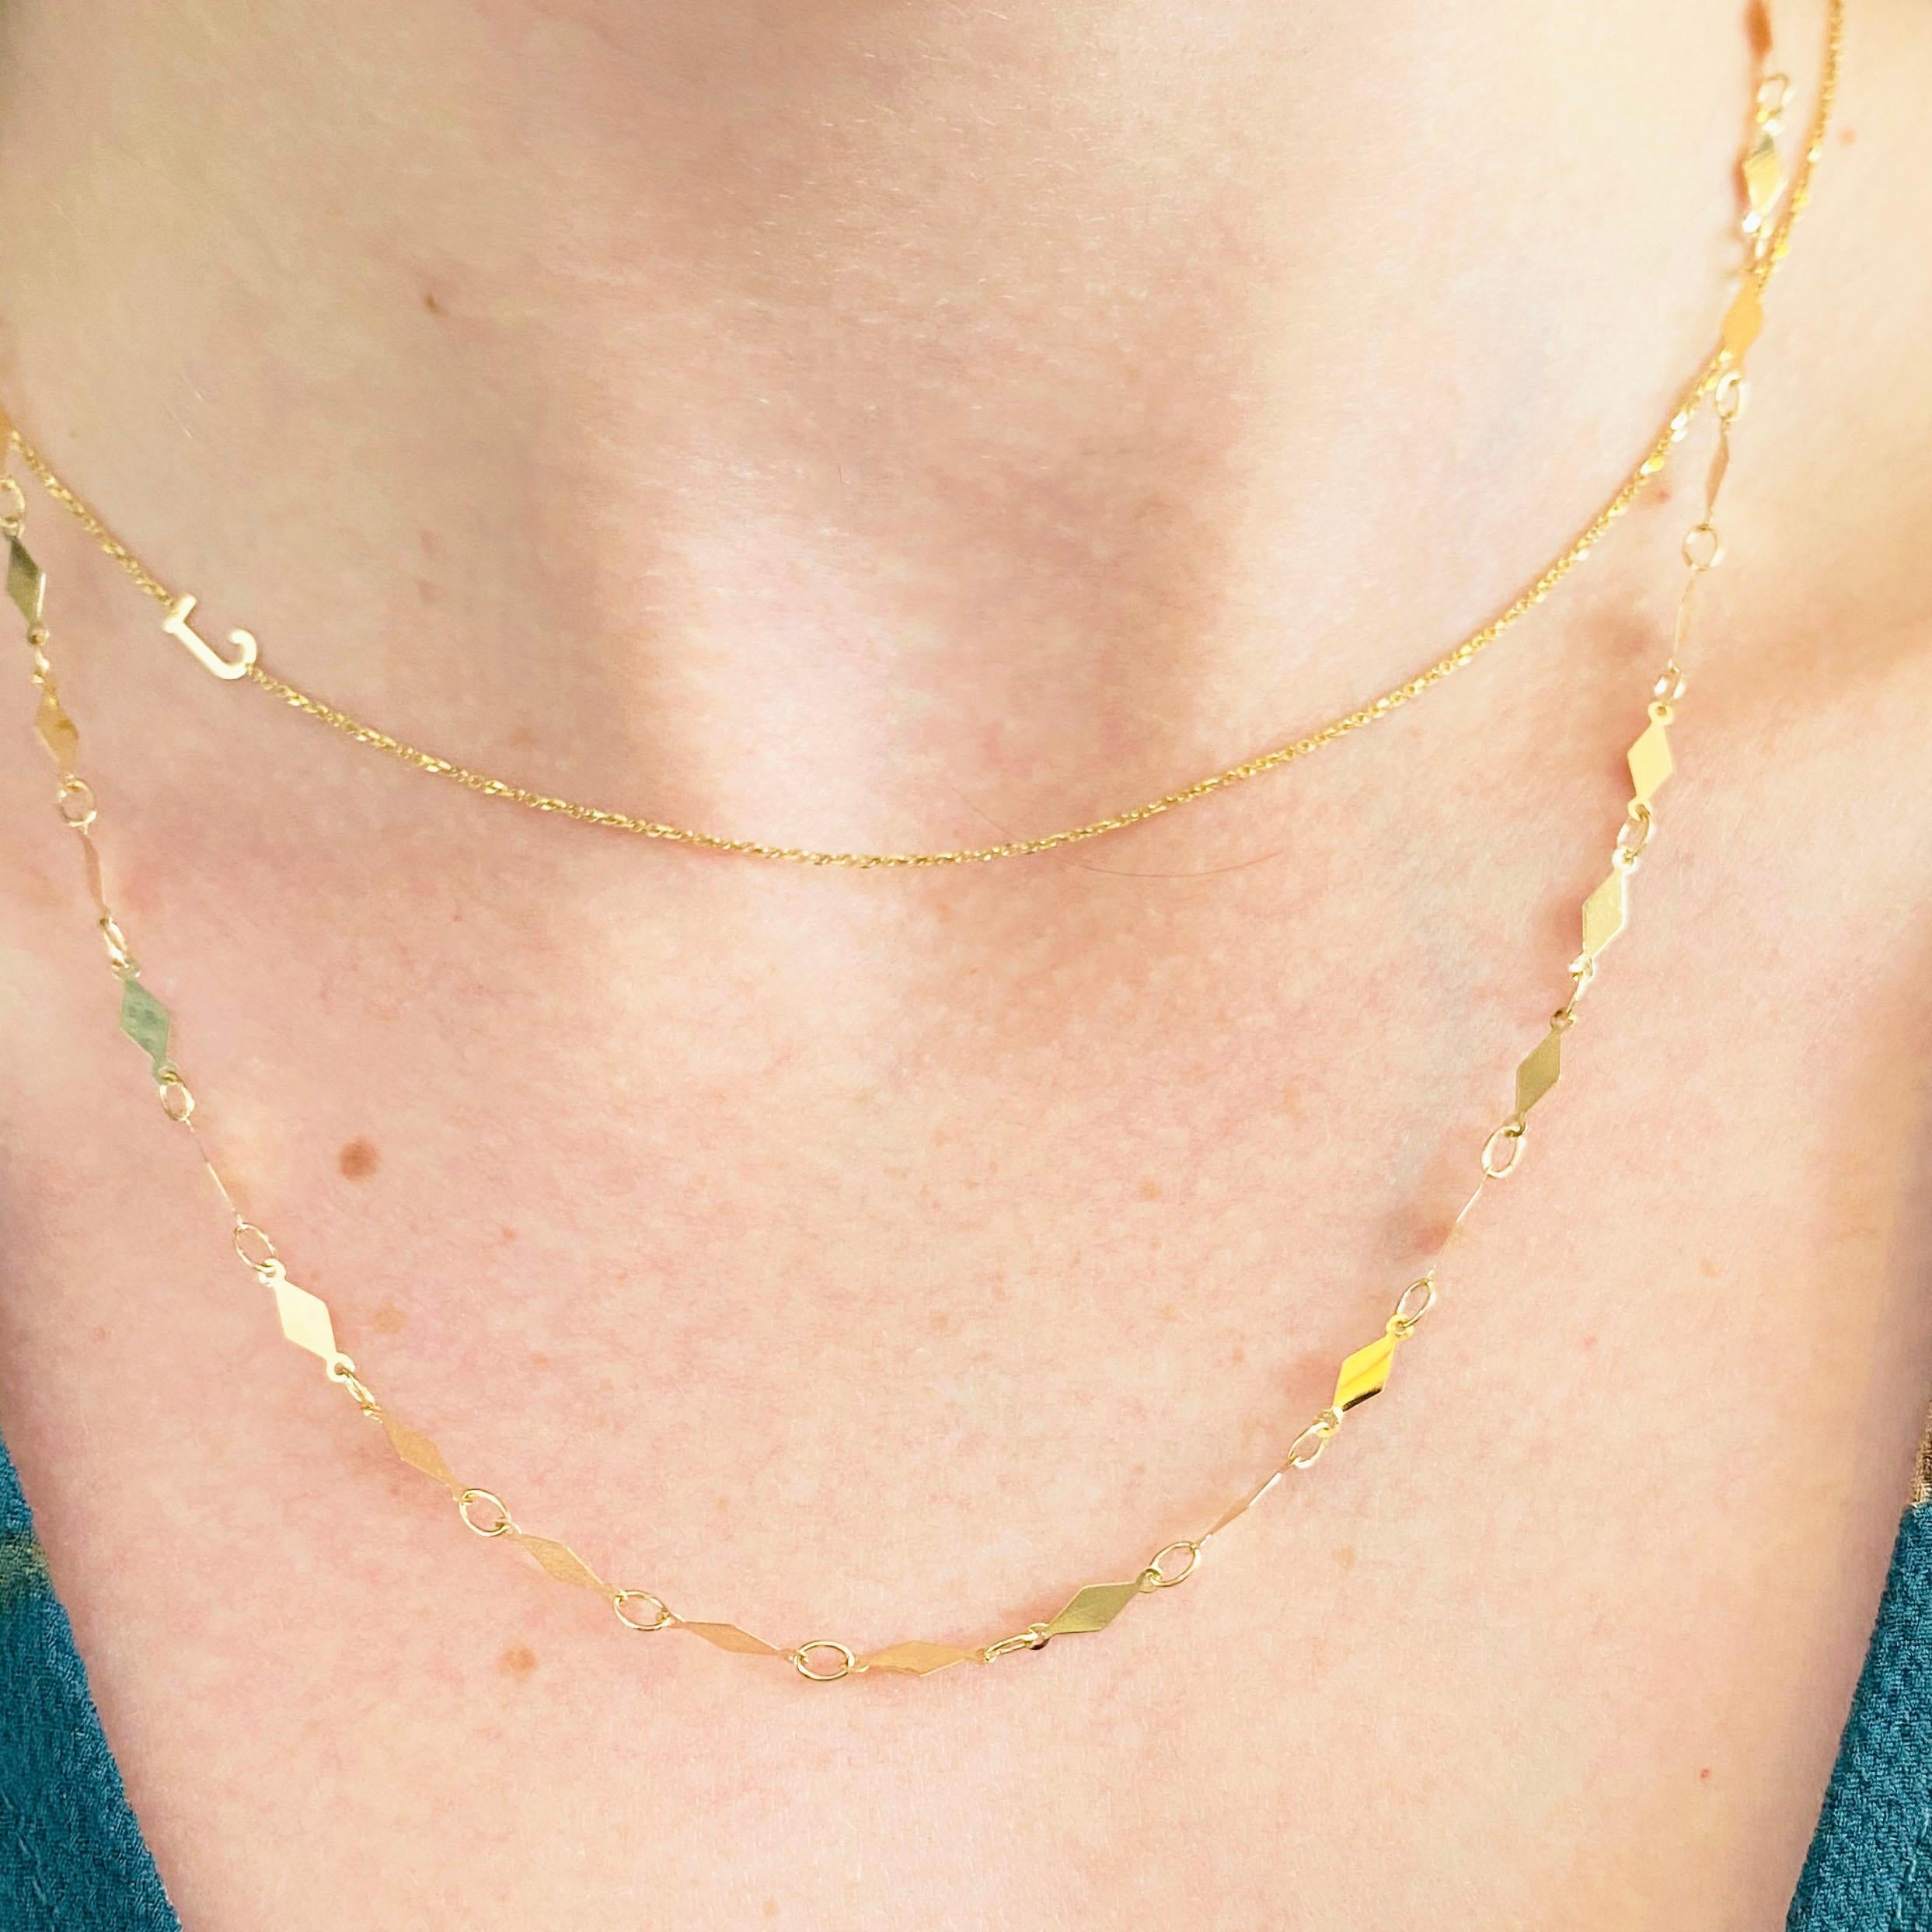 This 14k yellow gold sparkly, chain necklace matches everything and is the perfect addition to any outfit, casual or formal. Paired it with other necklaces, this necklace will make everything more shimmery! This necklace would make the perfect gift